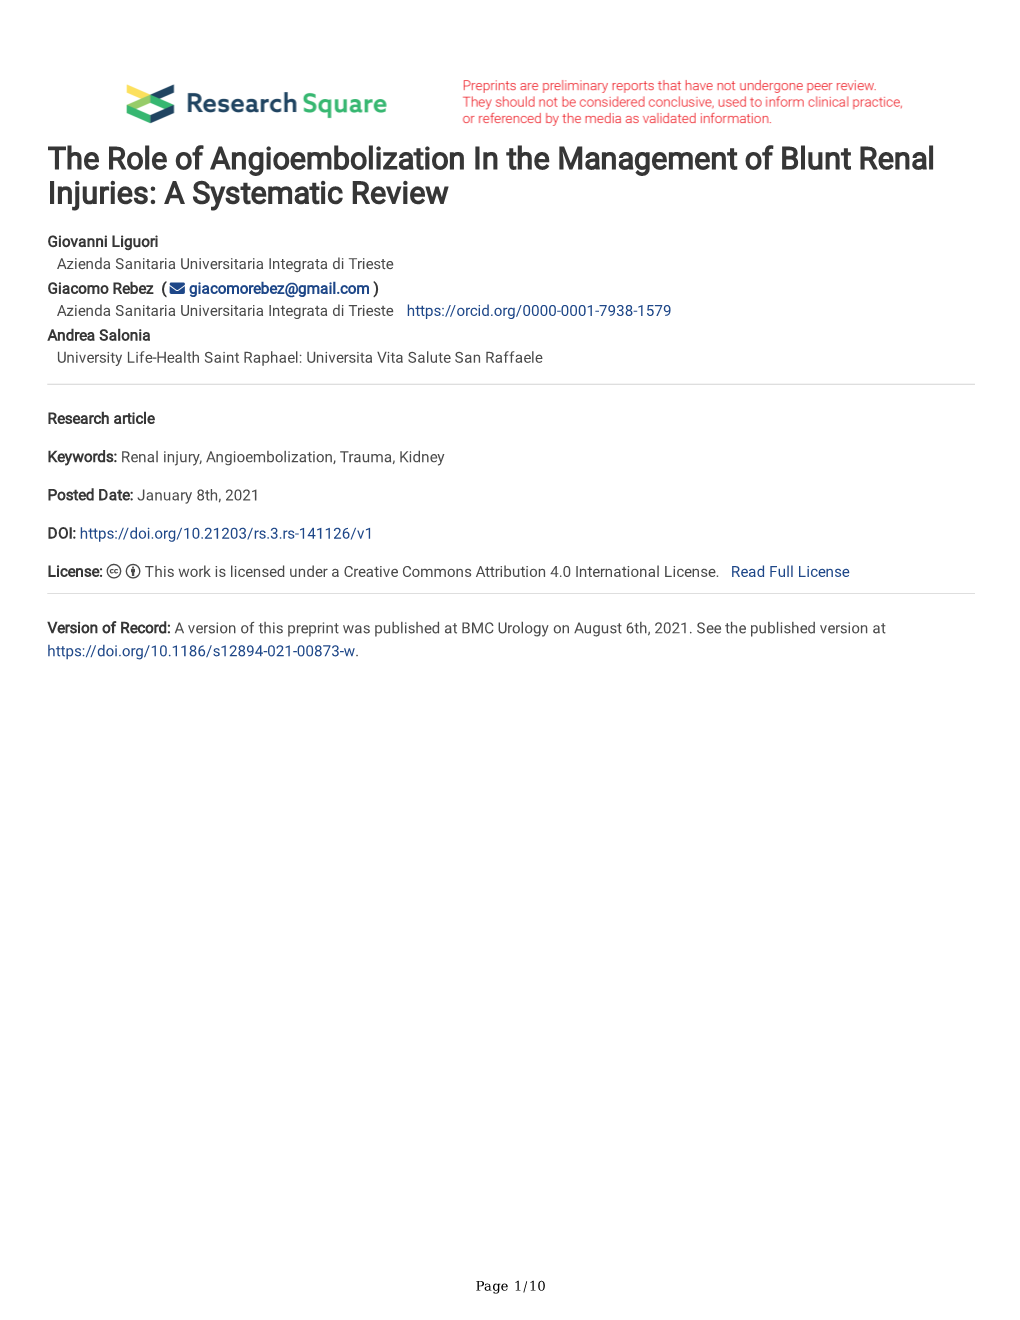 The Role of Angioembolization in the Management of Blunt Renal Injuries: a Systematic Review